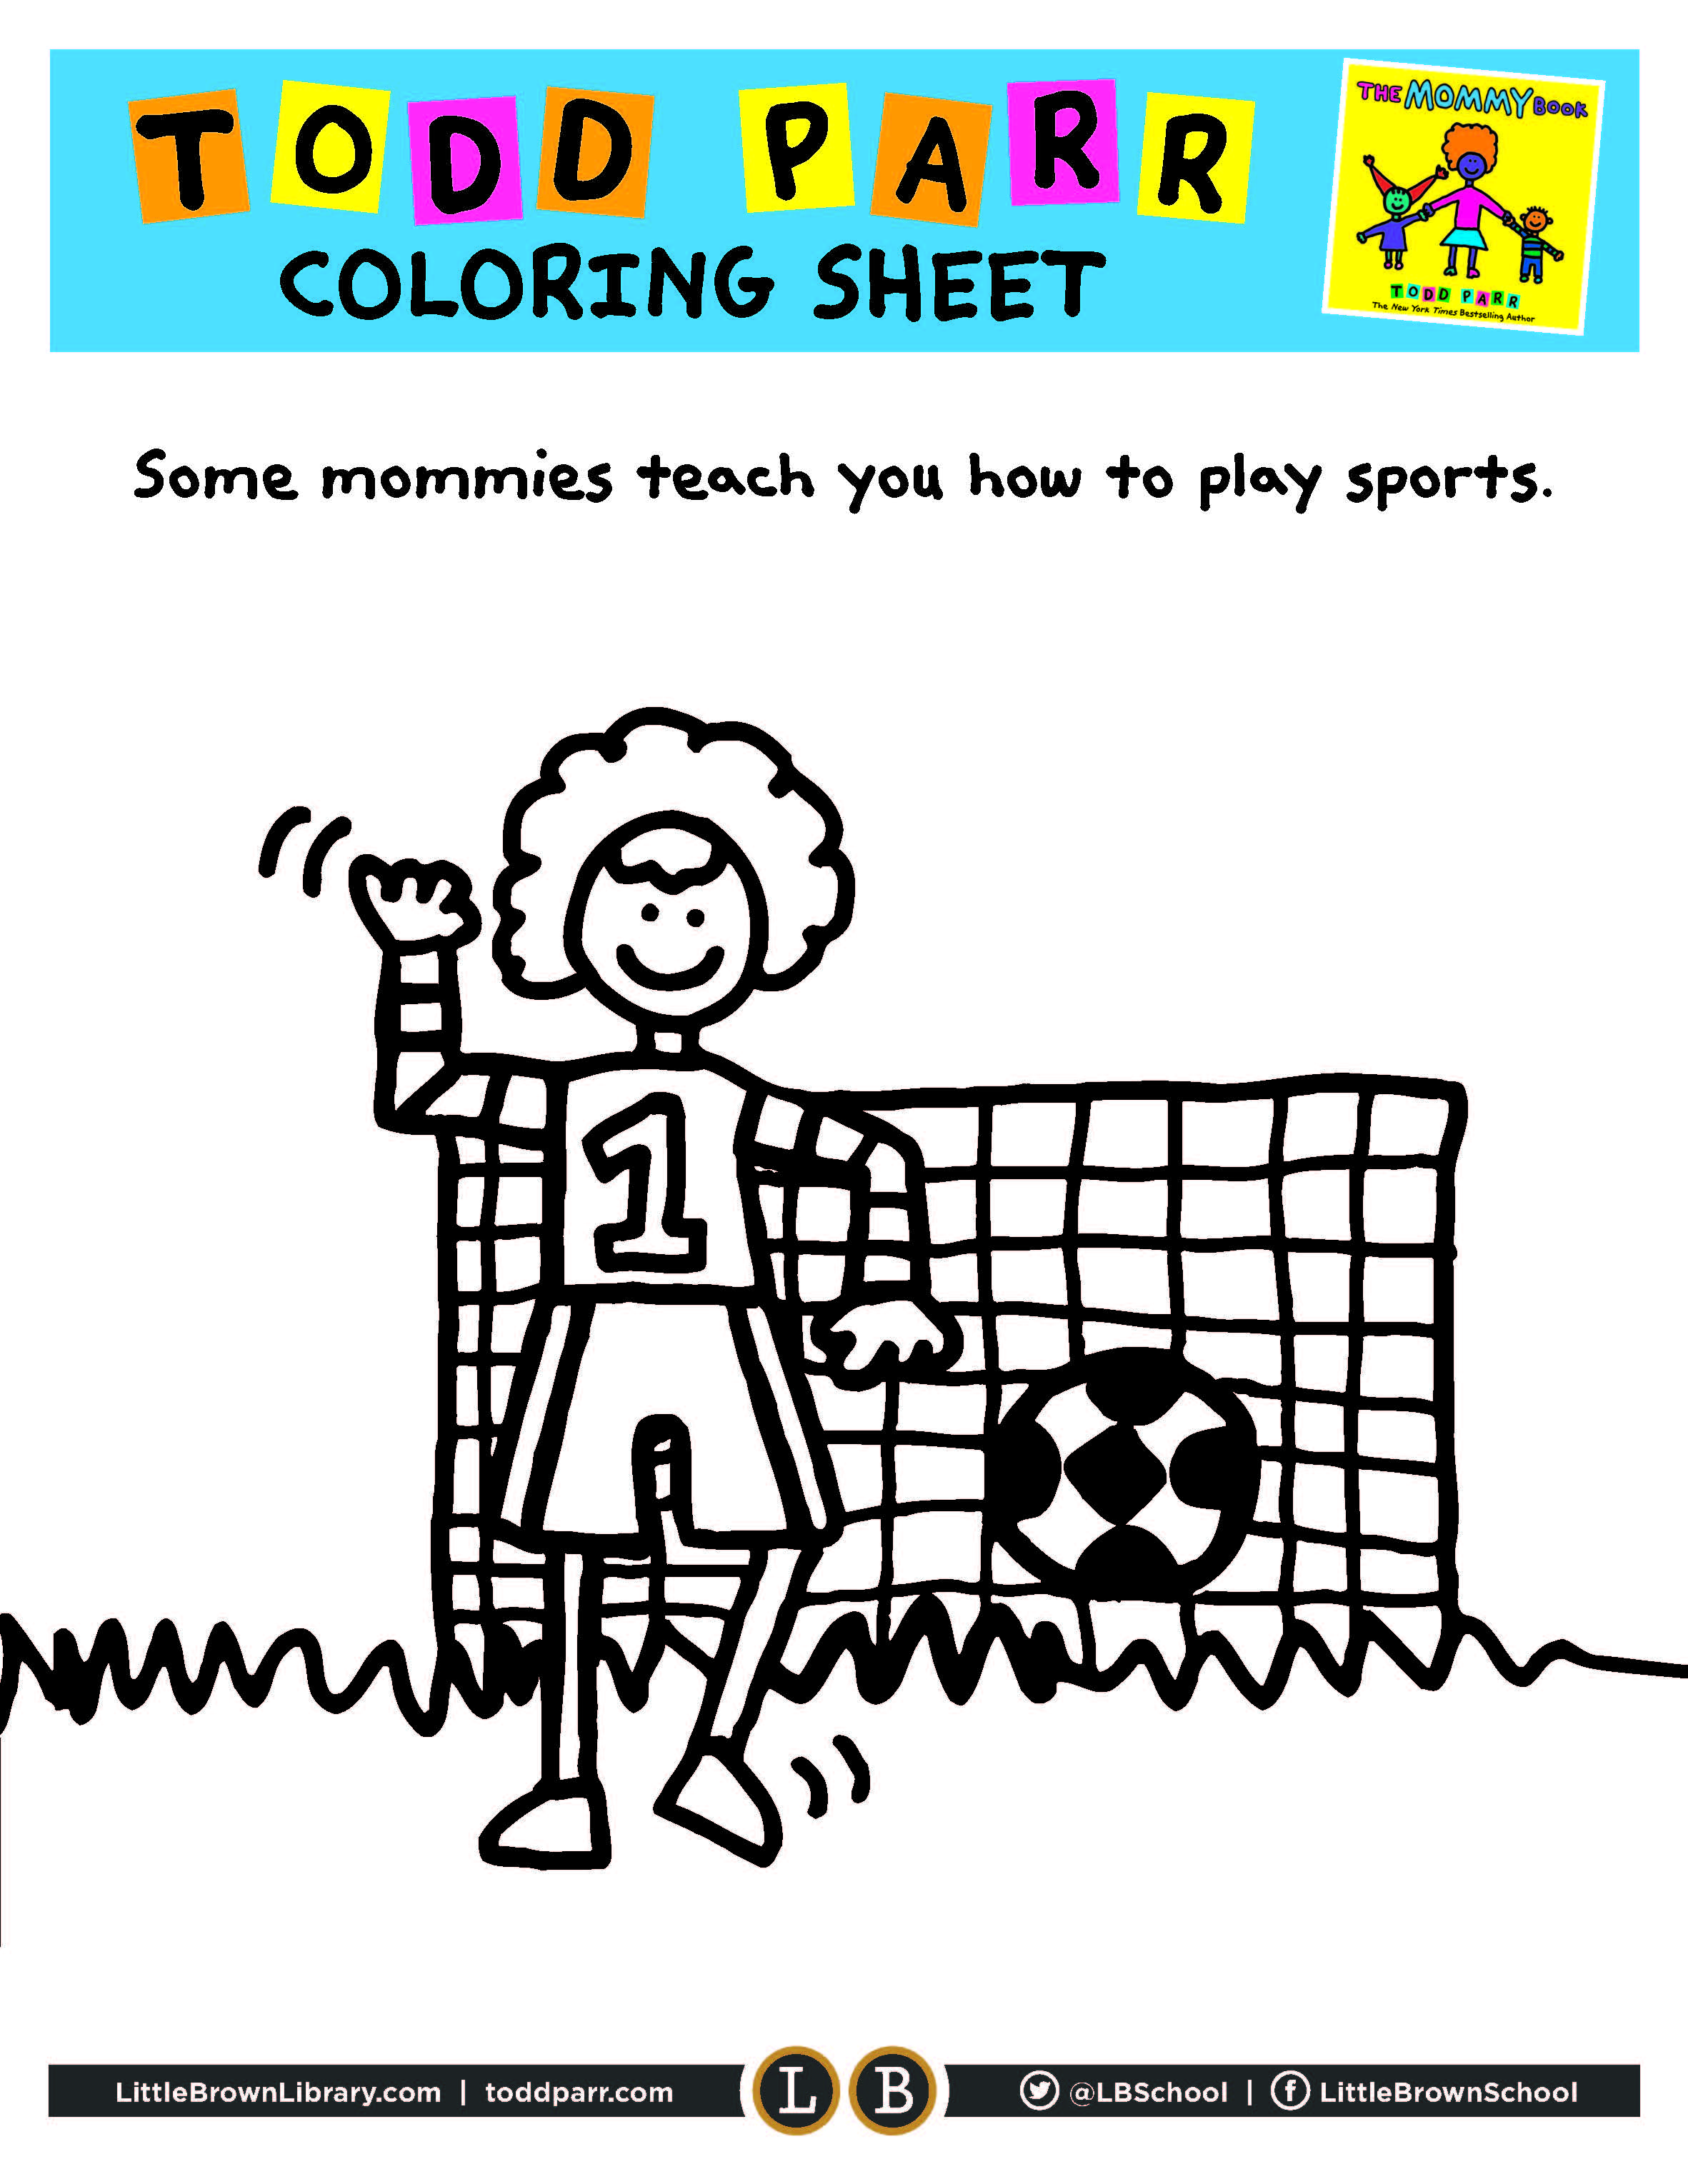 Todd Parr Coloring Page